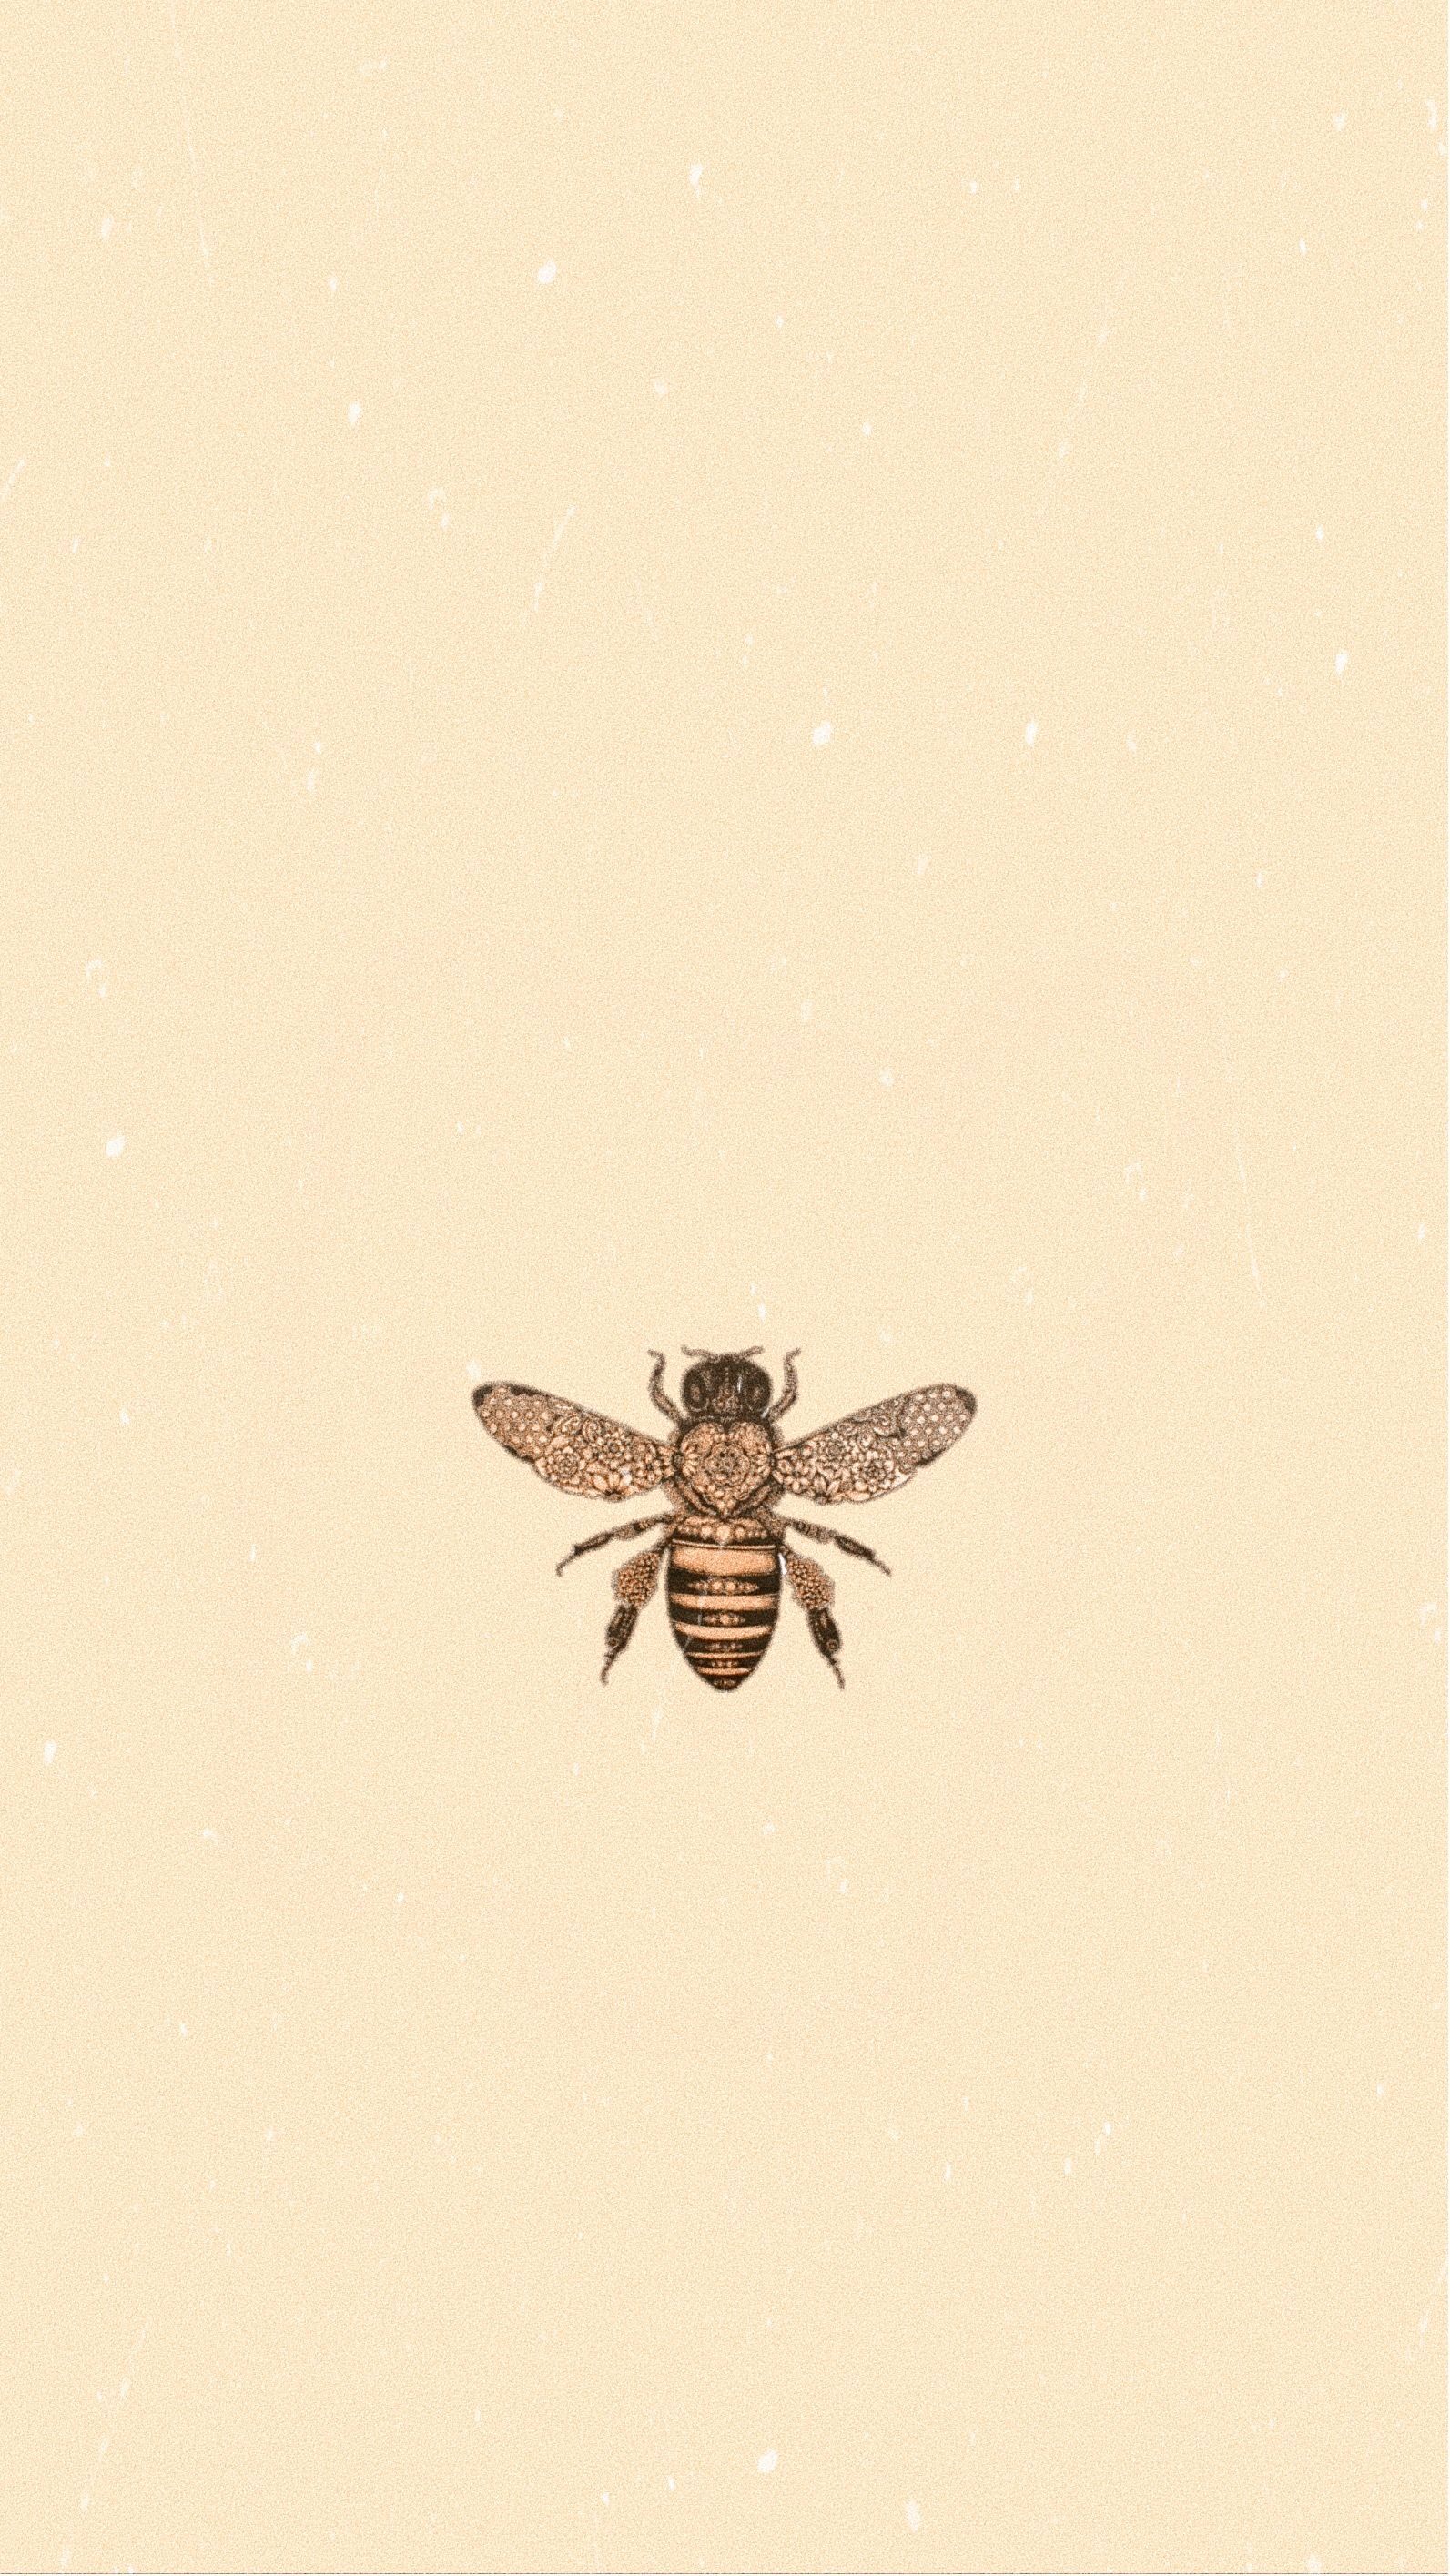 Honey Bee Illustration Images  Free Photos PNG Stickers Wallpapers   Backgrounds  rawpixel